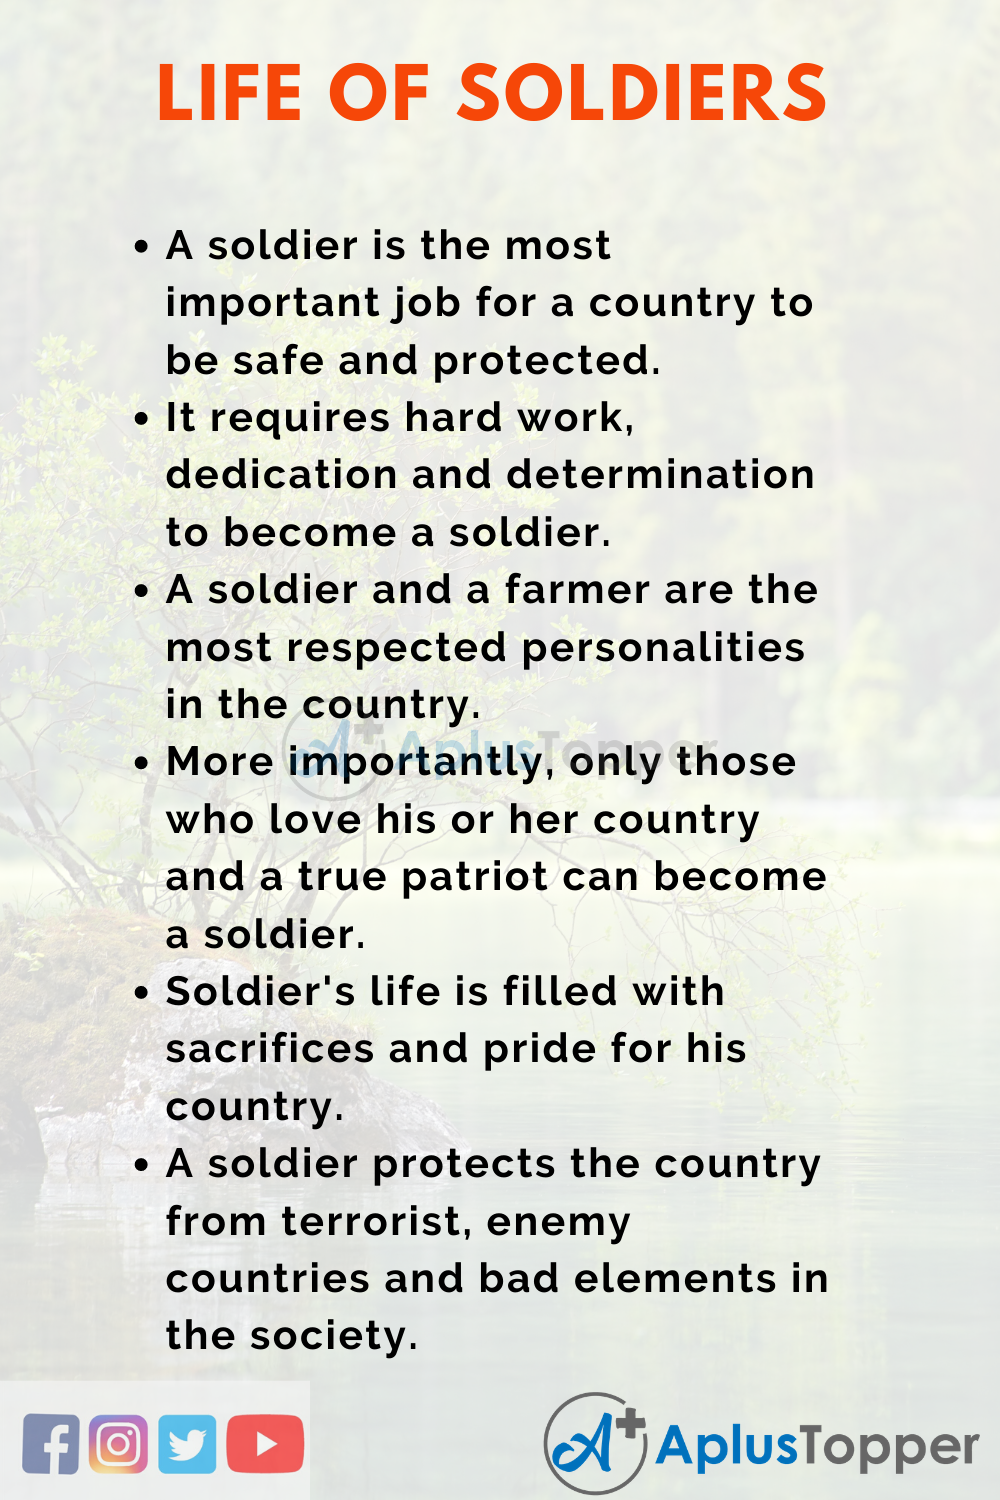 Essay on Life of Soldiers